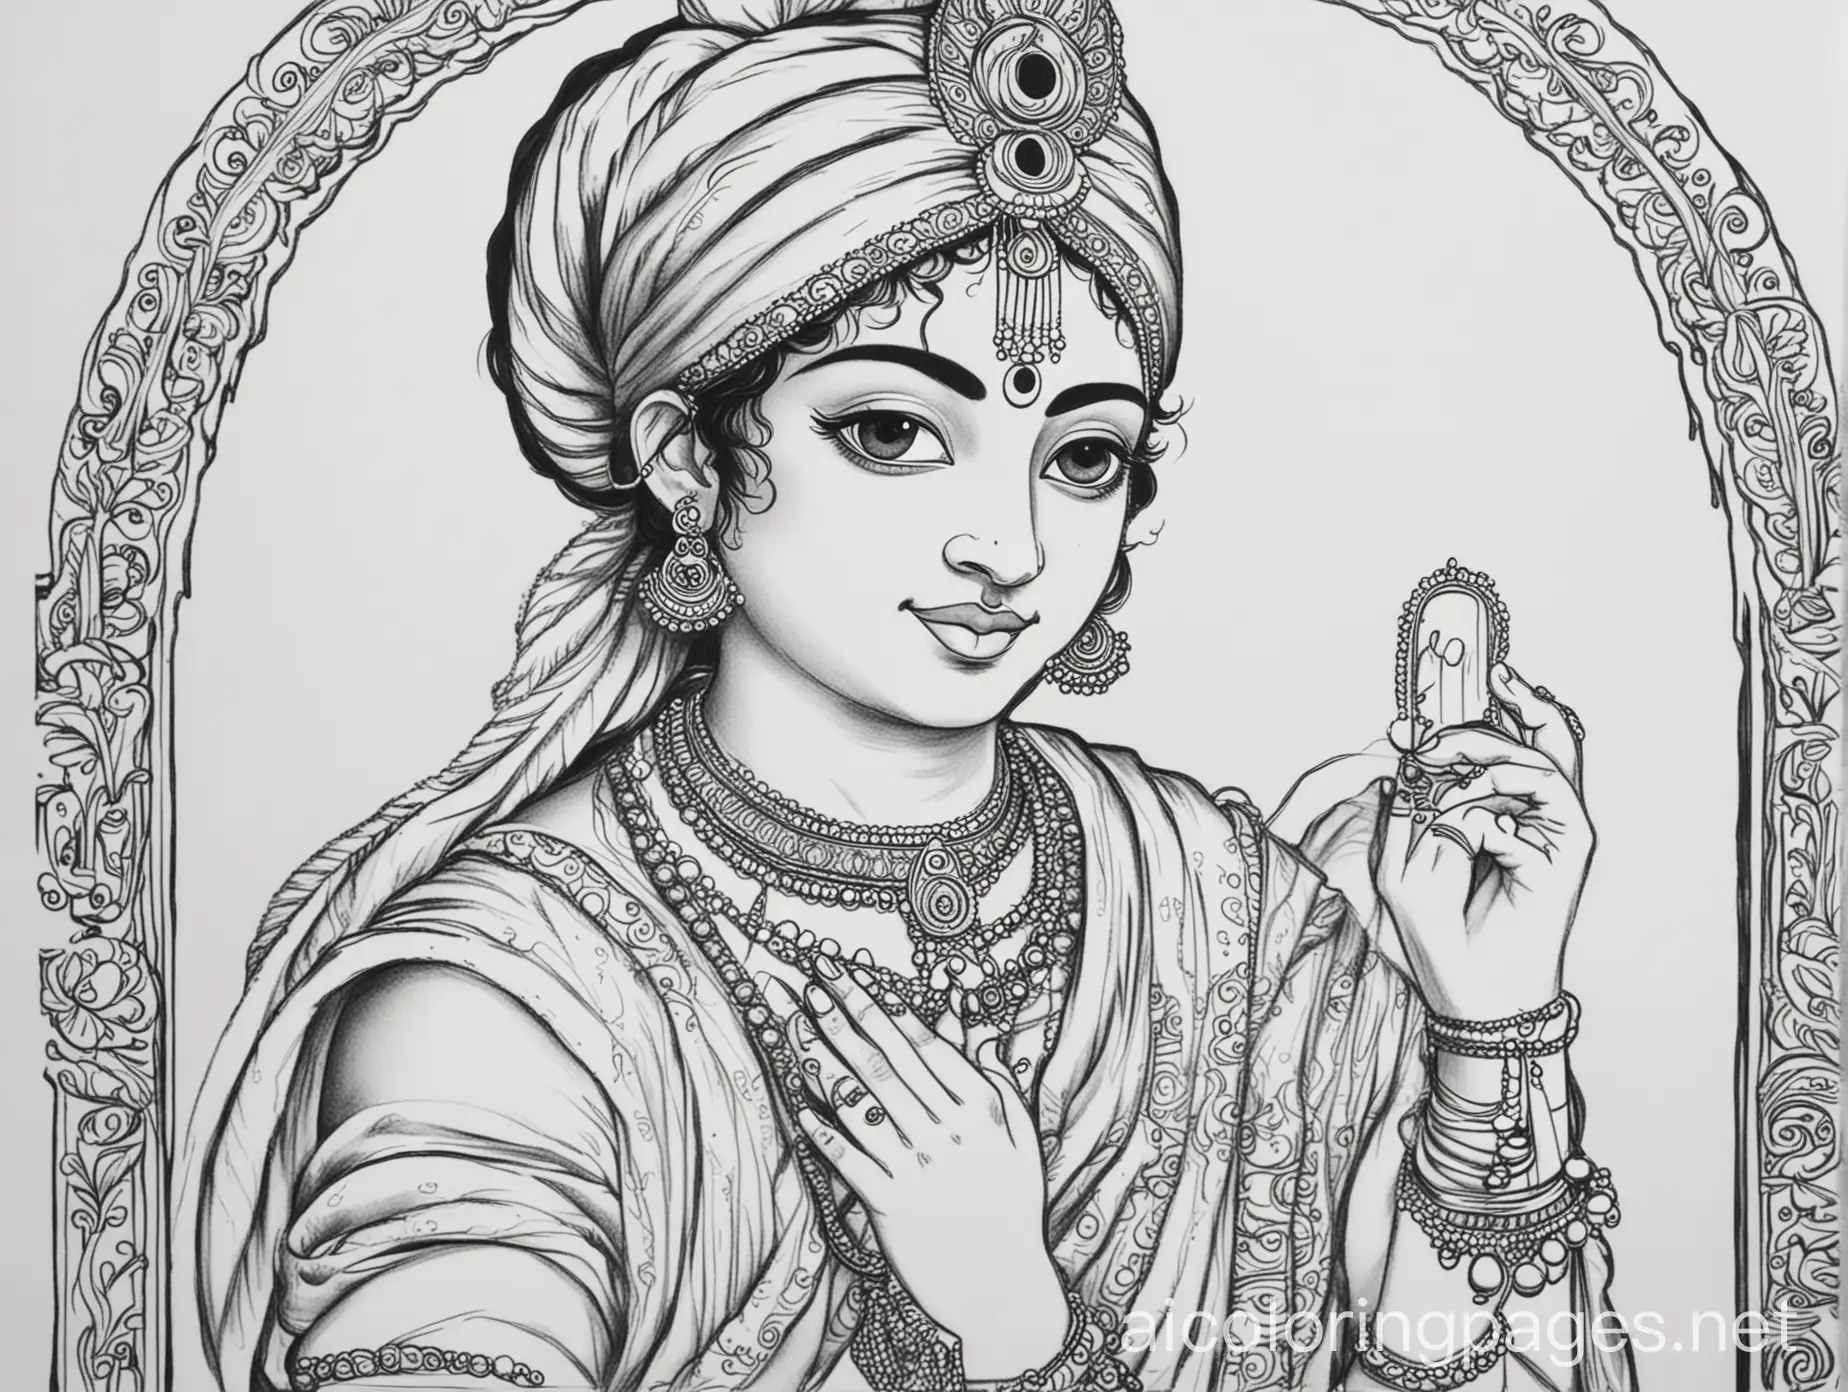 Lord-Krishna-Making-a-Video-Call-Coloring-Page-Simple-Line-Art-on-White-Background